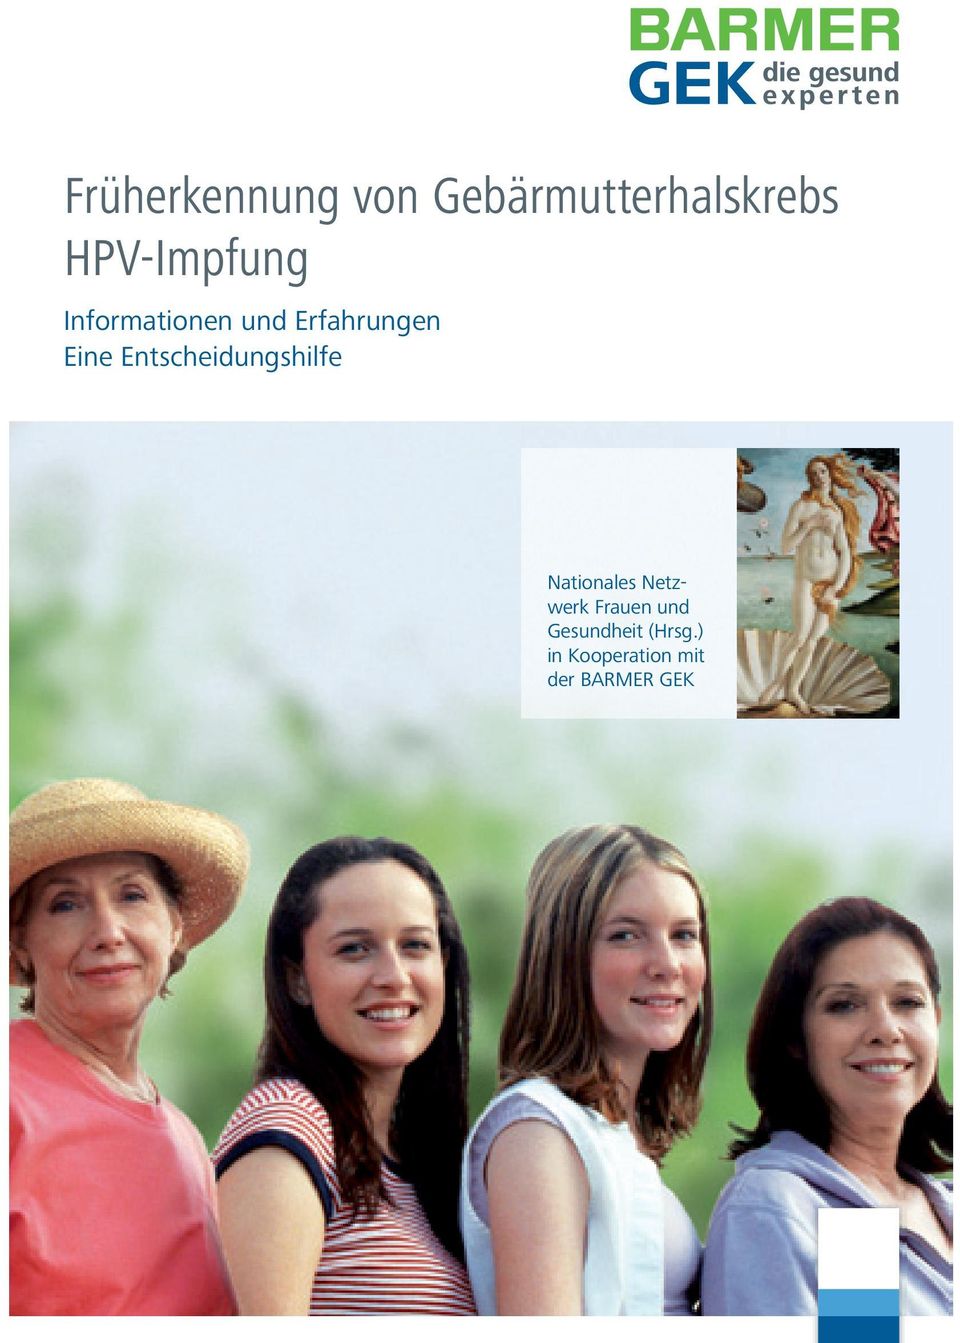 Hpv impfung barmer